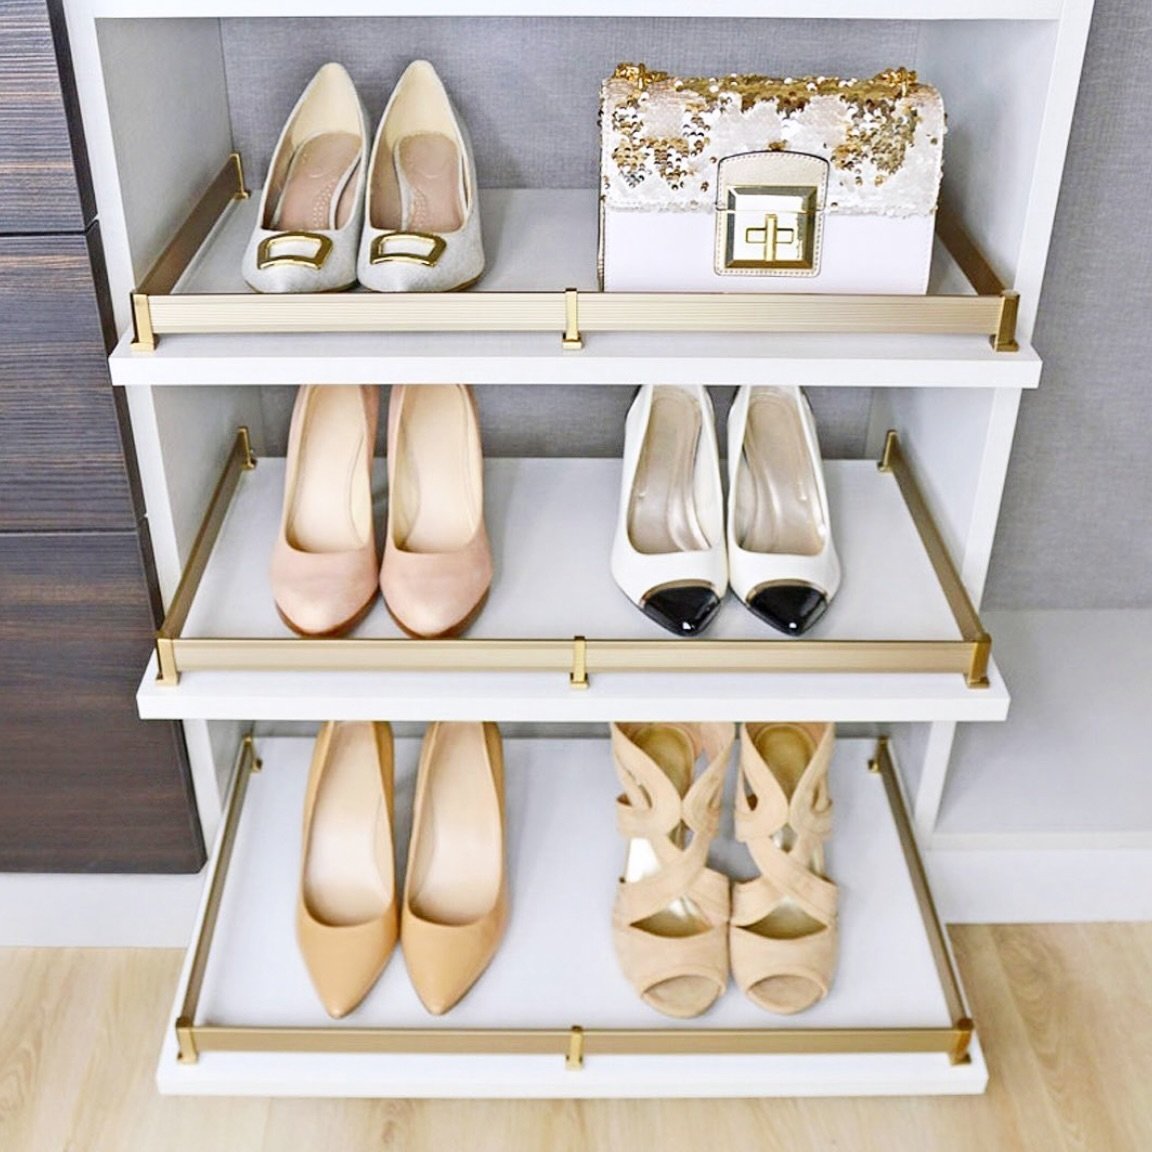 You can never have too much shoe storage! 👠🌸
Enjoy 20% Off with code SIMPLY20 until May 31st!Restrictions apply.
-
#simplyclosets #customclosets #customspaces #custombuiltins #closetdesign #spacedesign #closetsolutions #spacesolutions #closets #int